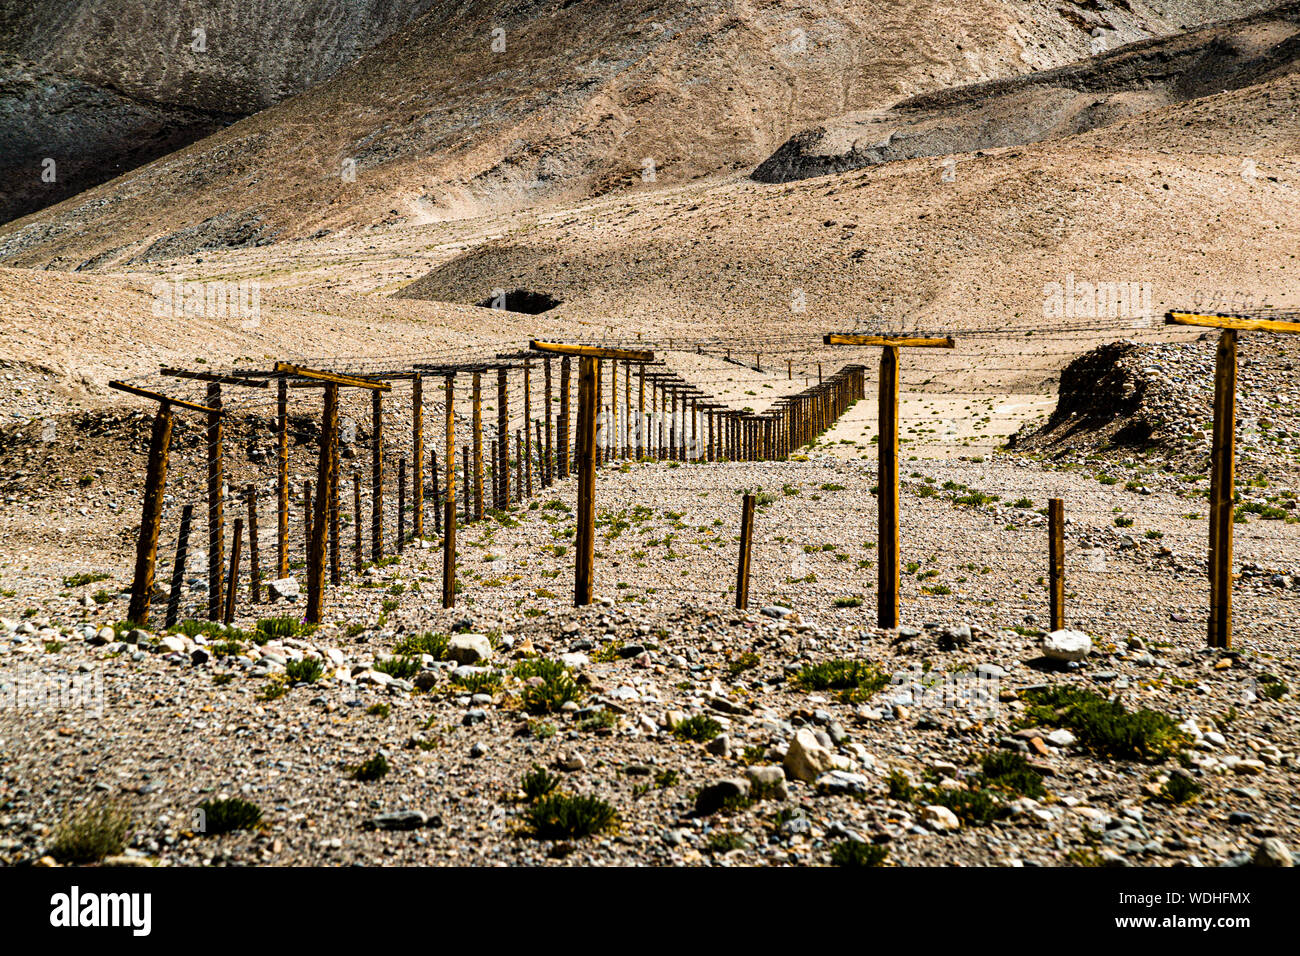 In the sparsely populated mountainous landscape along the Chinese border, a barbed wire fence stretches for hundreds of kilometers near Музкол, Tajikistan Stock Photo